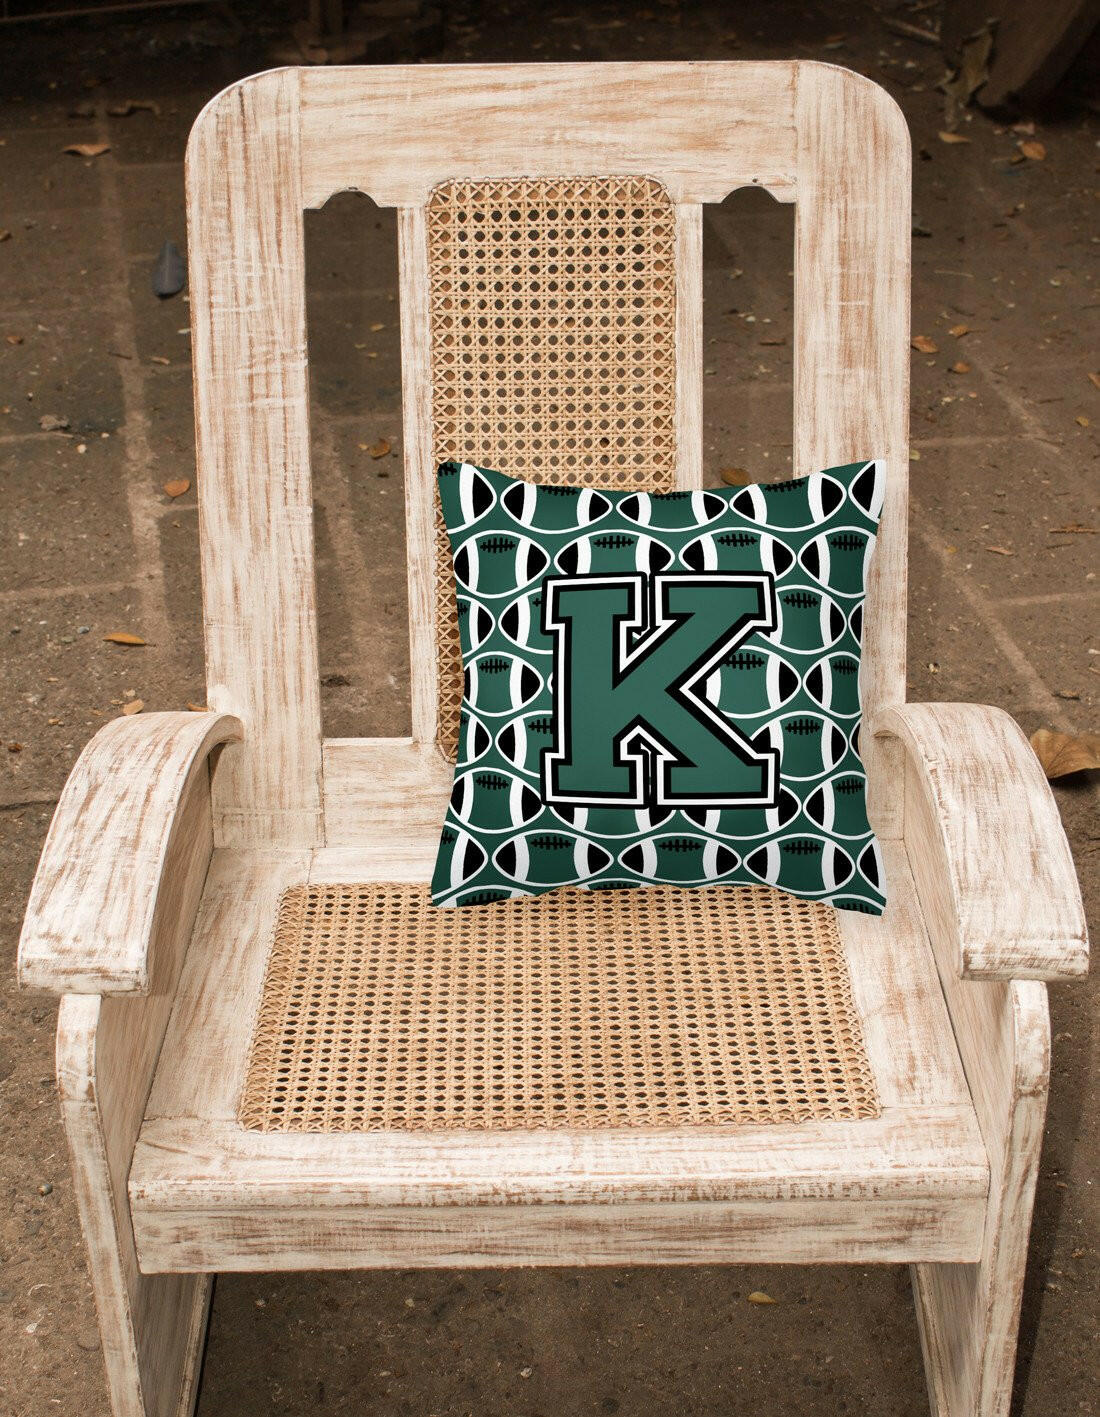 Letter K Football Green and White Fabric Decorative Pillow CJ1071-KPW1414 by Caroline's Treasures